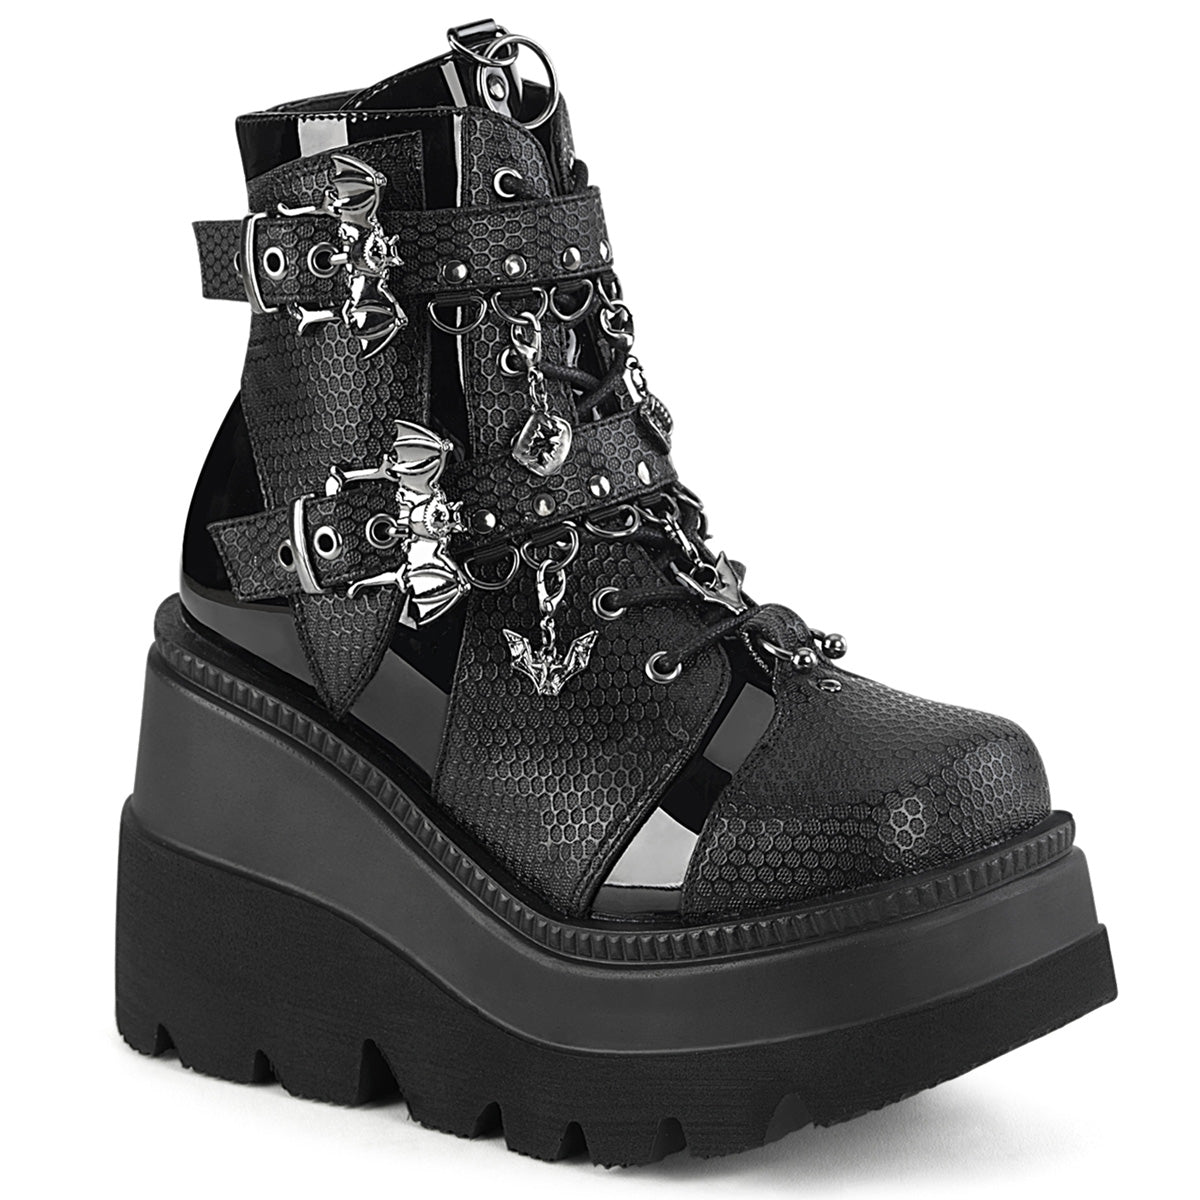 SHAKER-66 Bat Buckle Wedge Ankle Boots by Demonia